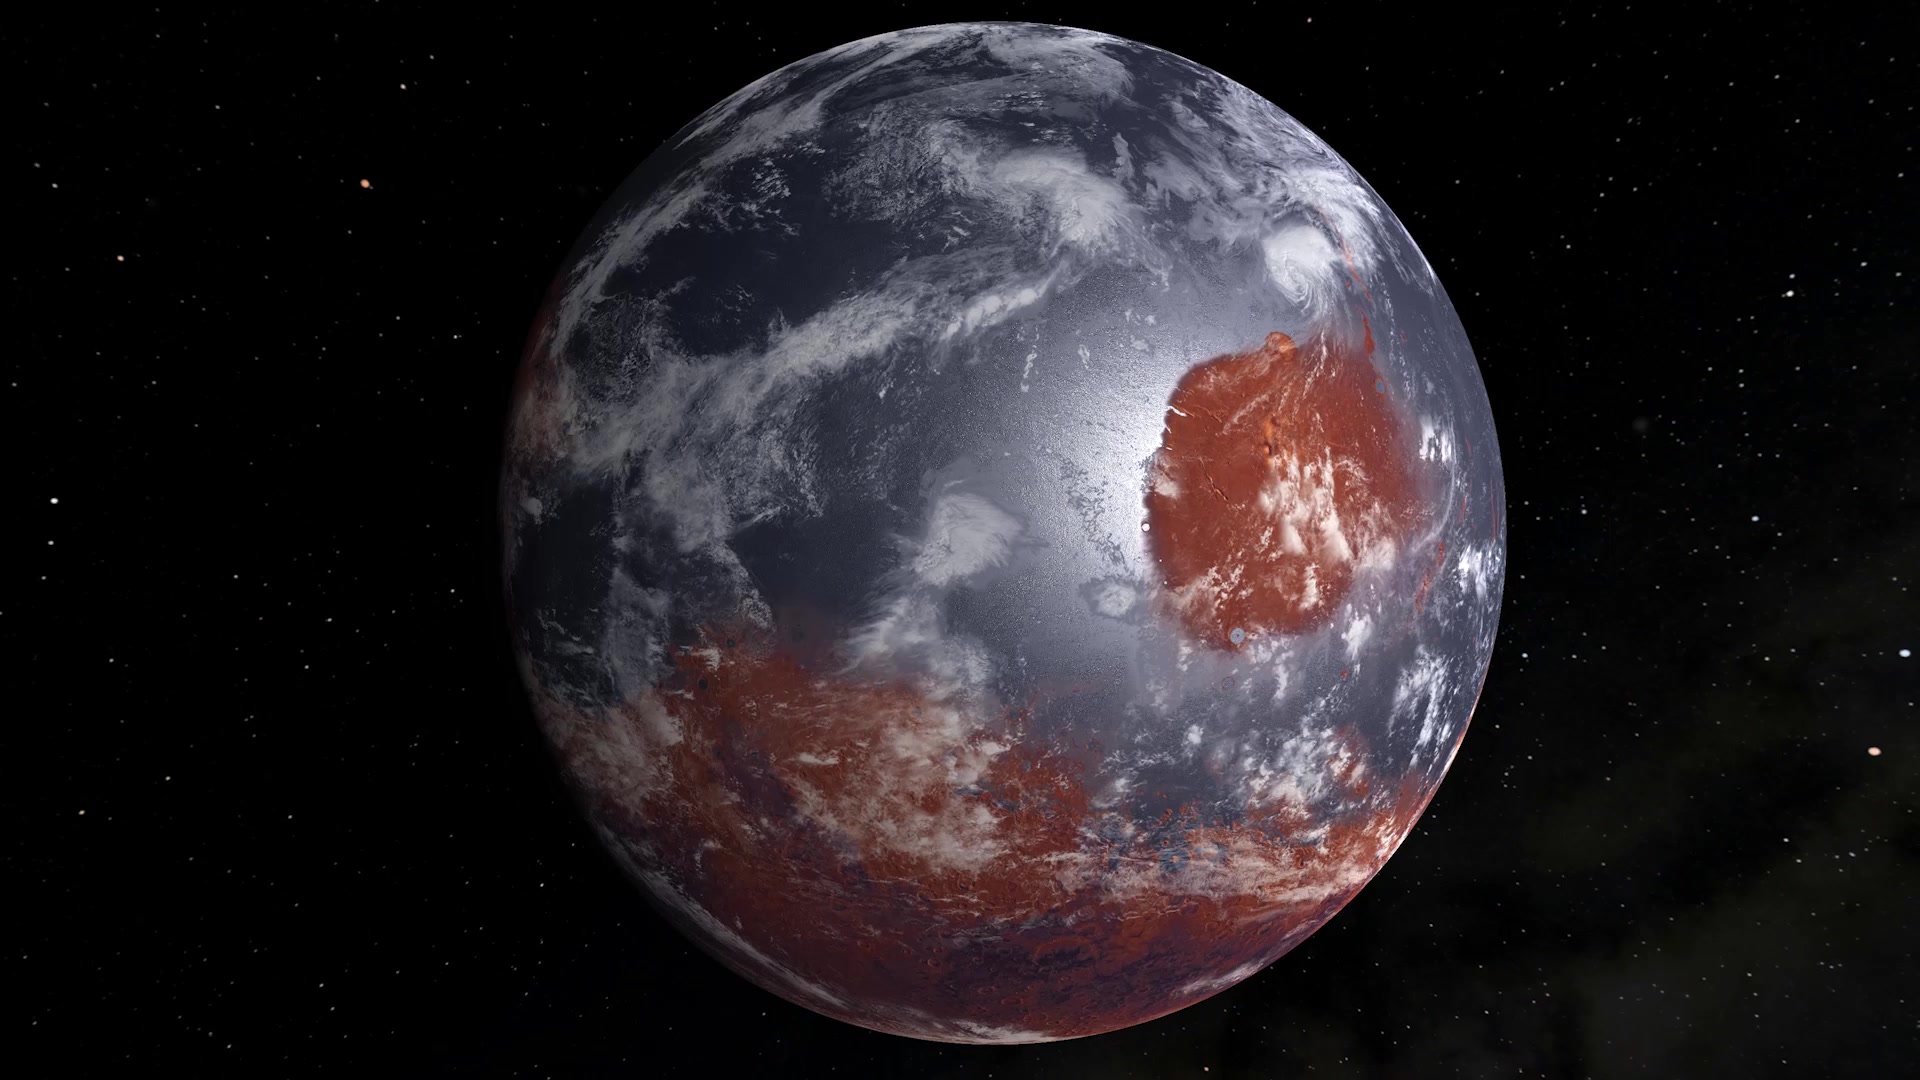 This is an artist's model of an early Mars &mdash; billions of years ago &mdash; which may have had oceans and a thicker atmosphere. It was created by filling Mars' lower altitudes with water and adding cloud cover. The locations for the ancient ocean are based on current altitudes and do not reflect the actual ancient topography.